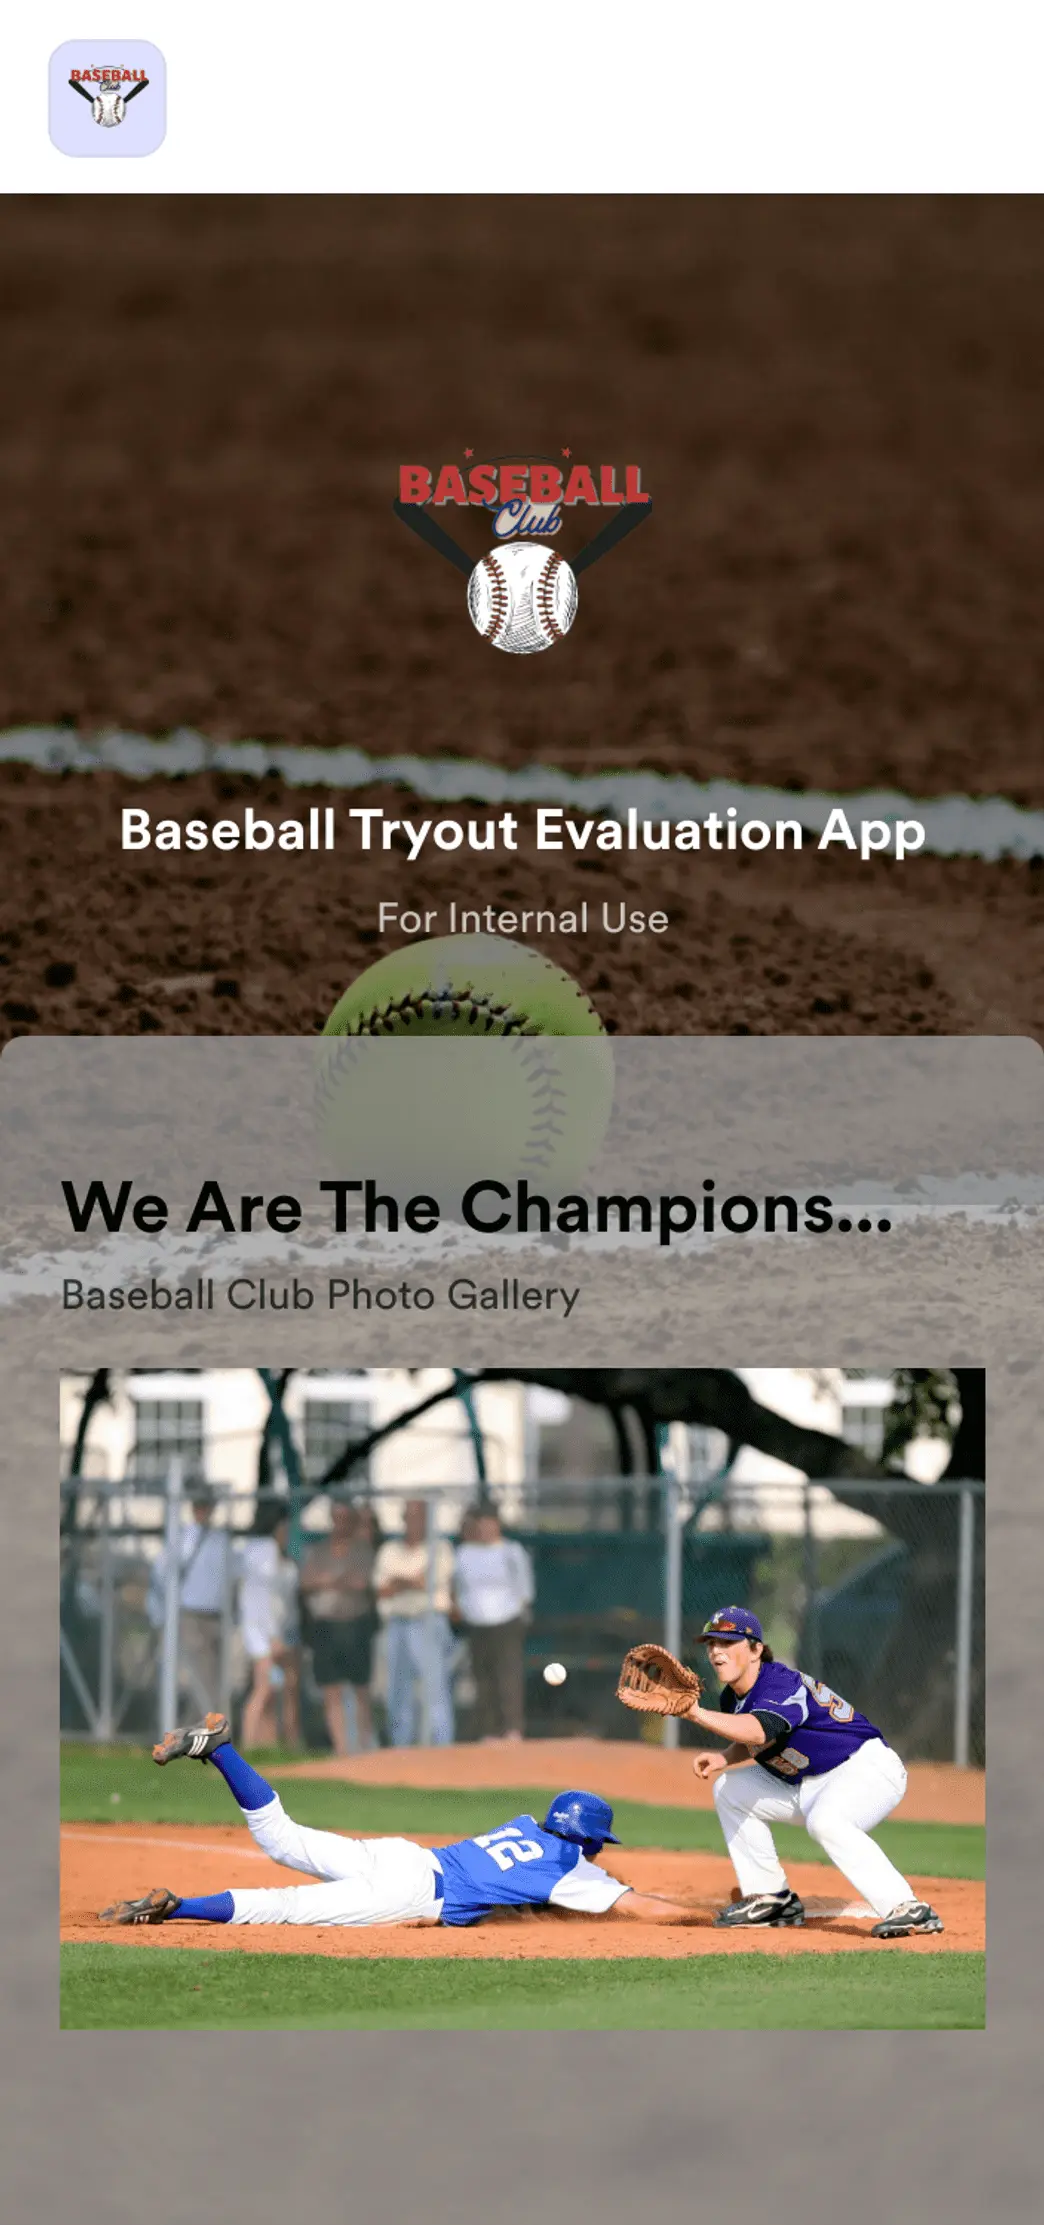 Baseball Tryout Evaluation App